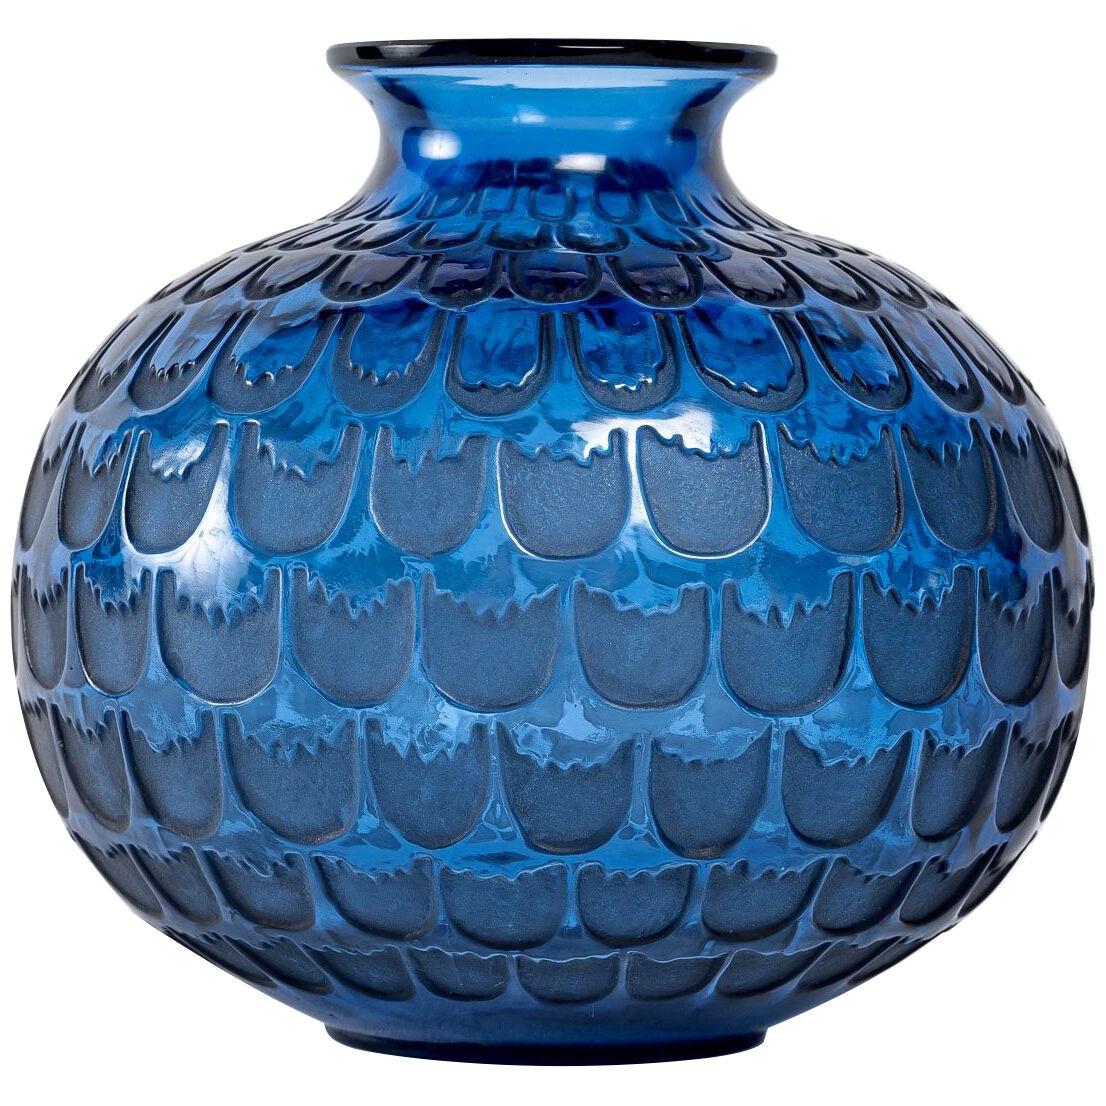 1930 Rene Lalique - Vase Grenade Navy Blue Glass With Grey Patina